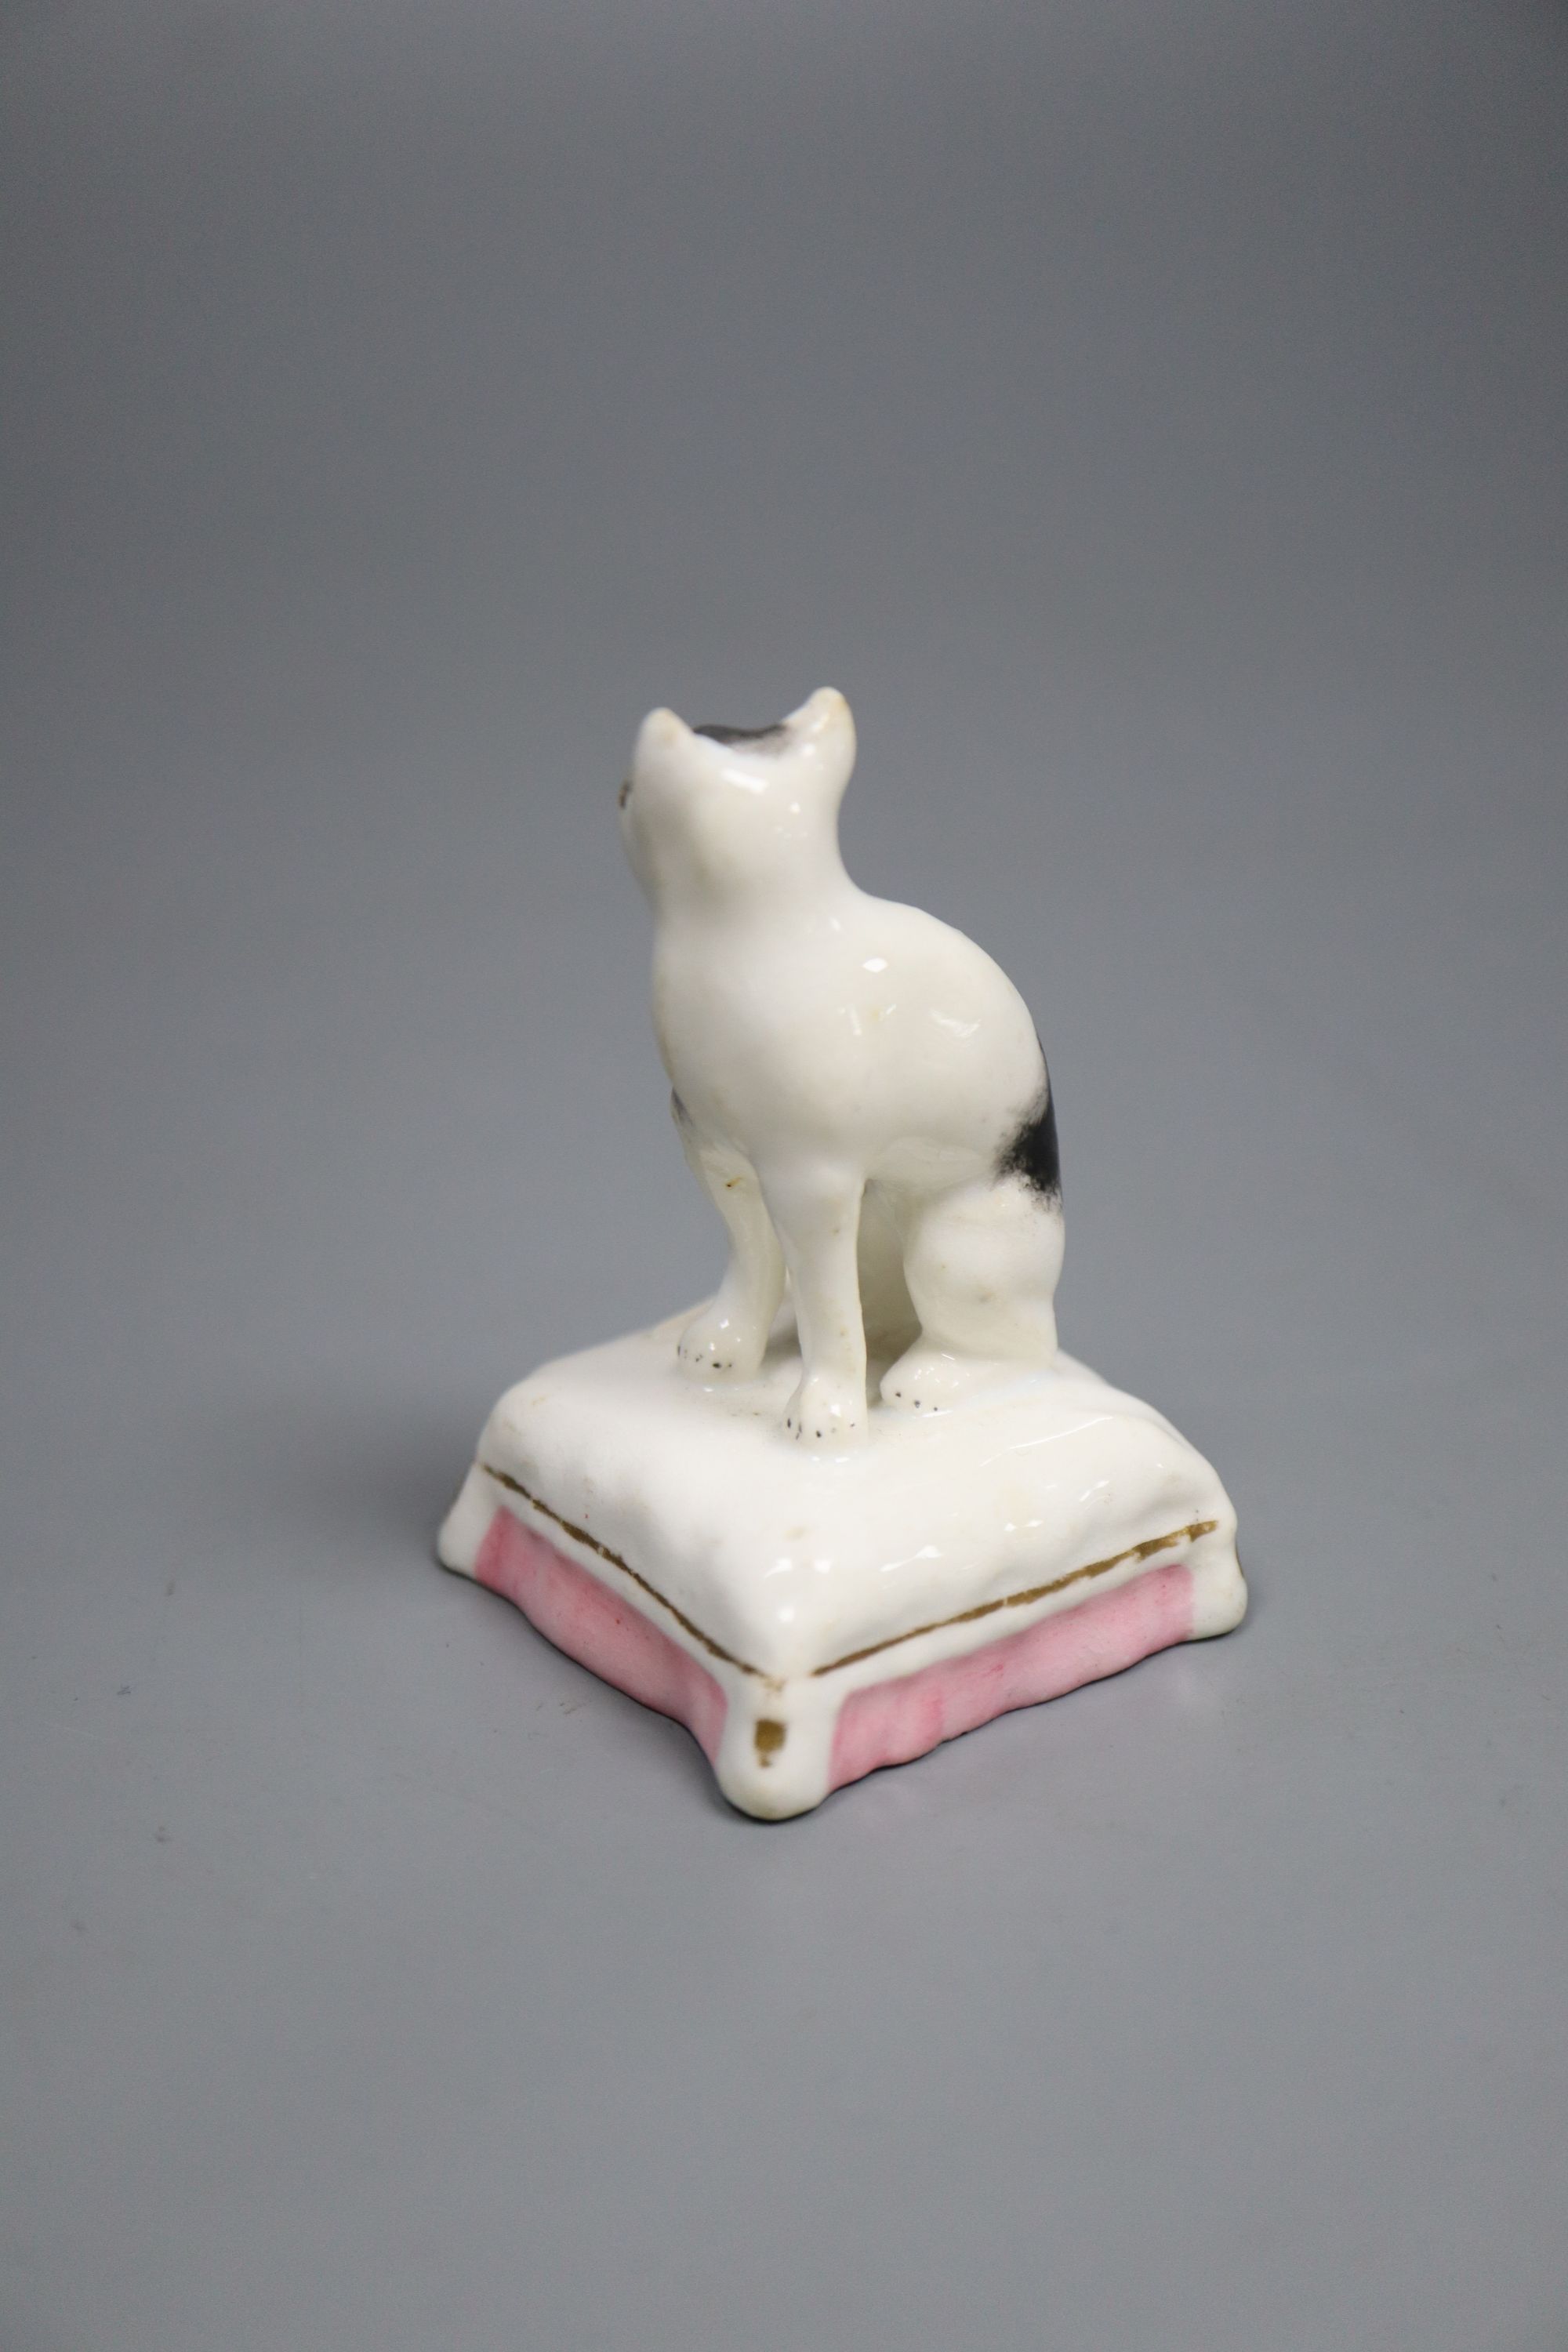 A rare Staffordshire porcelain figure of a cat seated on a cushion, c.1835-50, 6cm